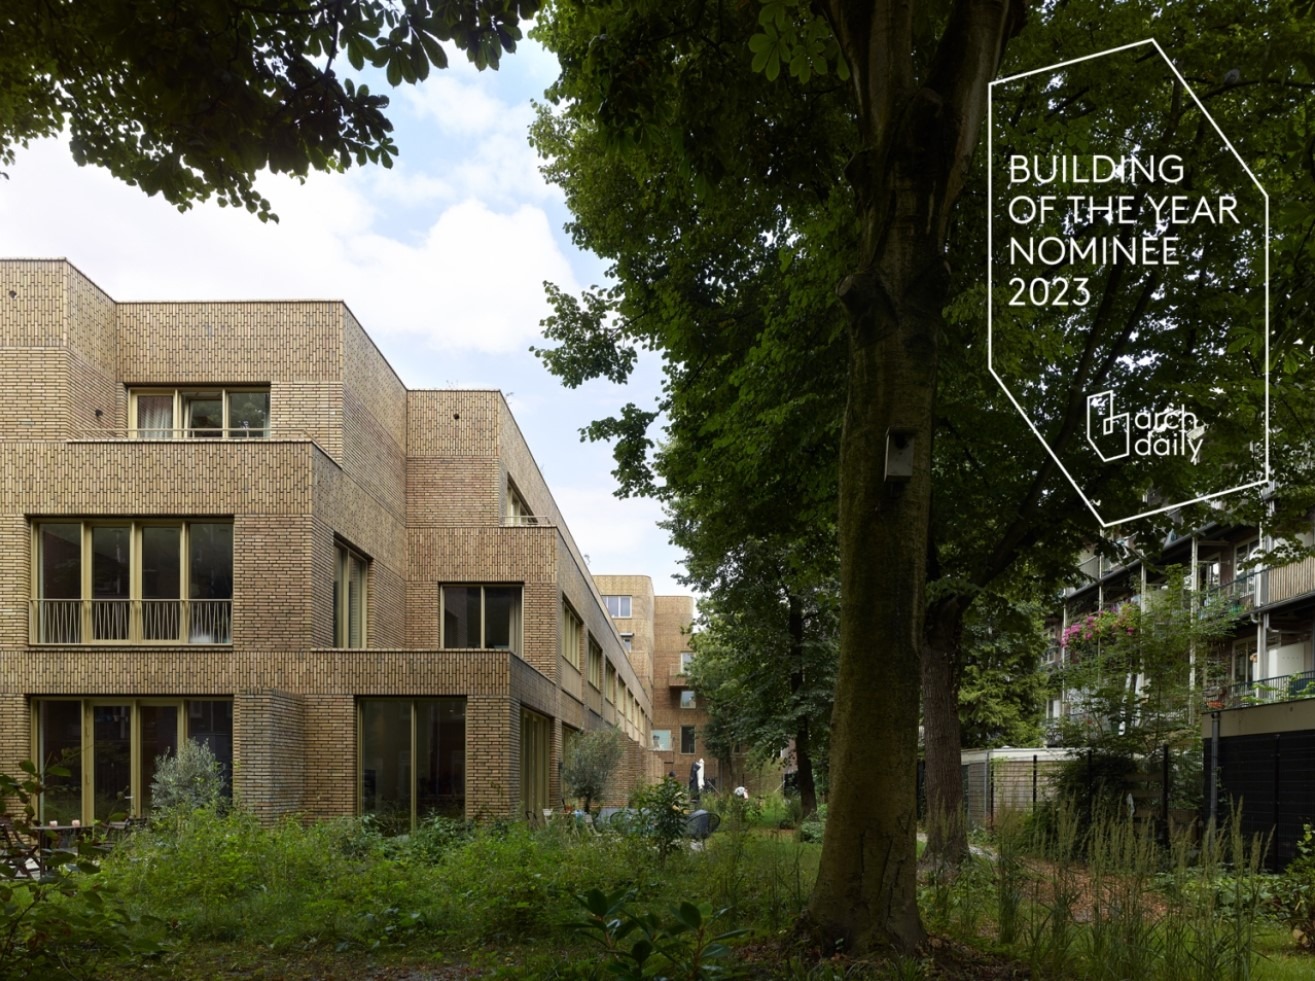 Nomination ArchDaily Buidling of the Year 2023